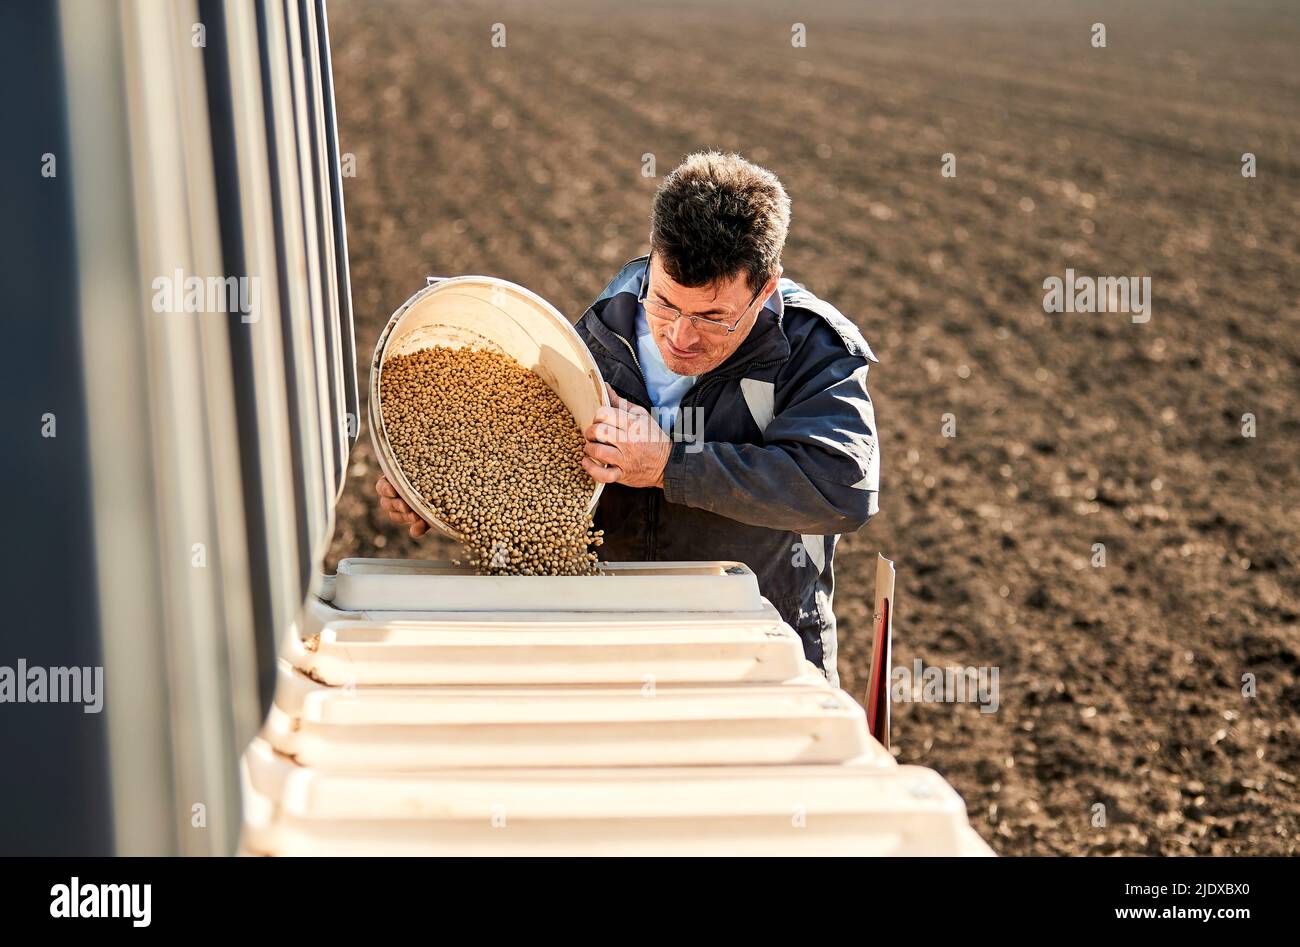 Male farmer pouring soybean seeds in machine at field Stock Photo